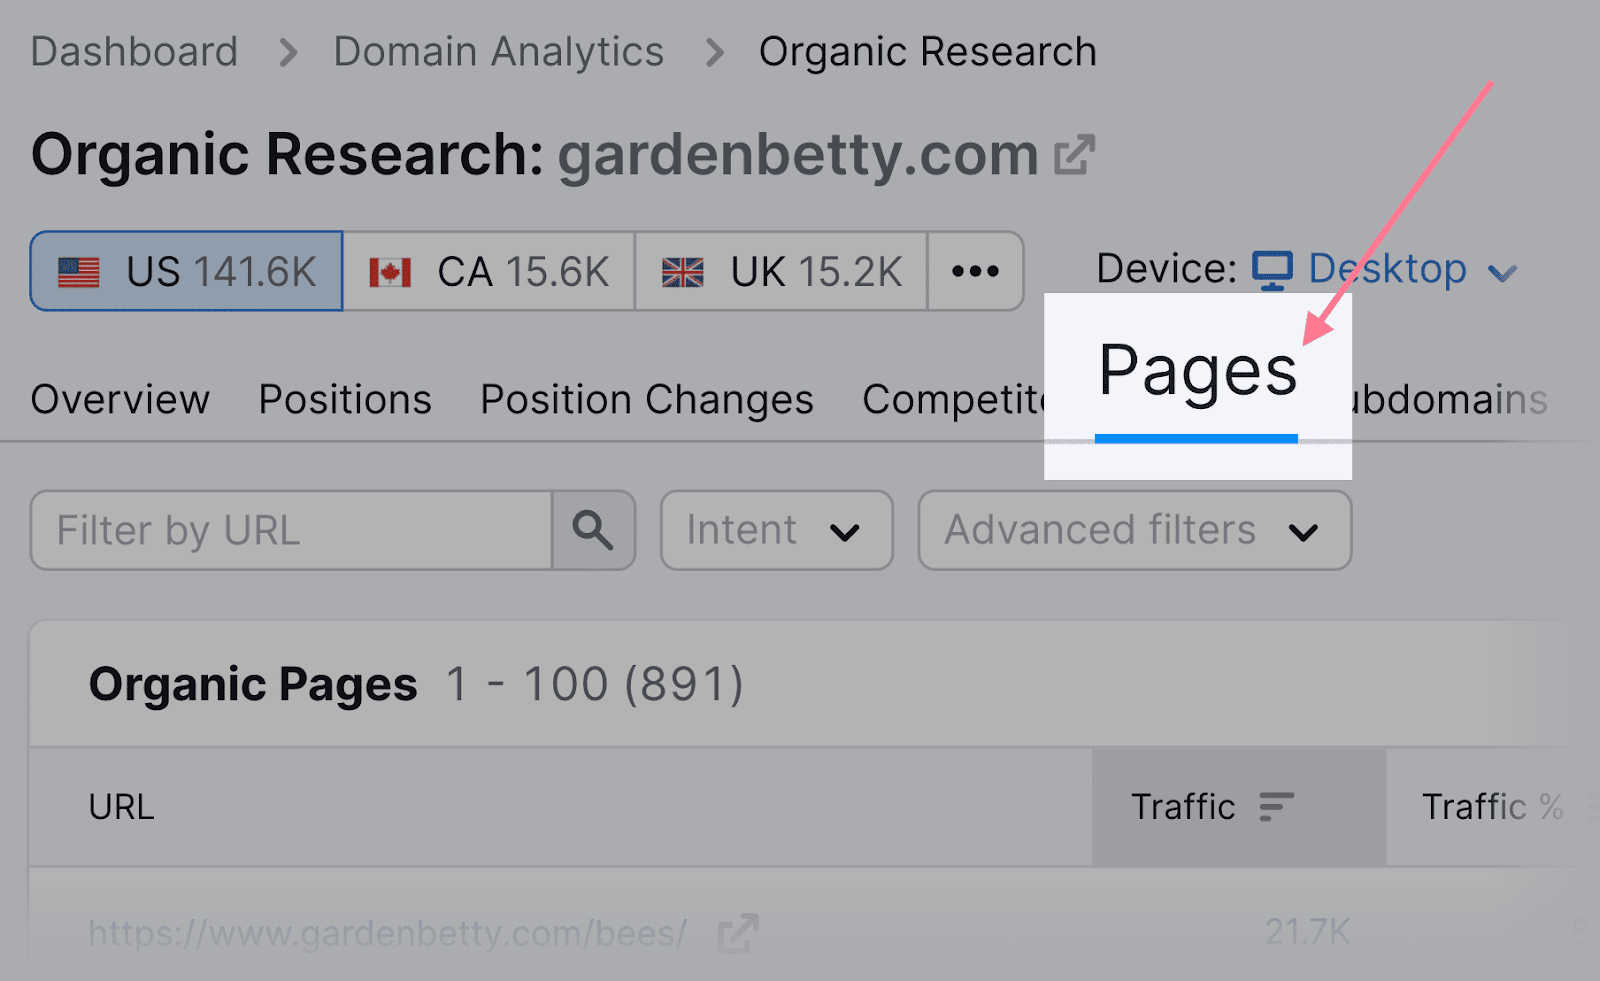 Pages estimated Google traffic